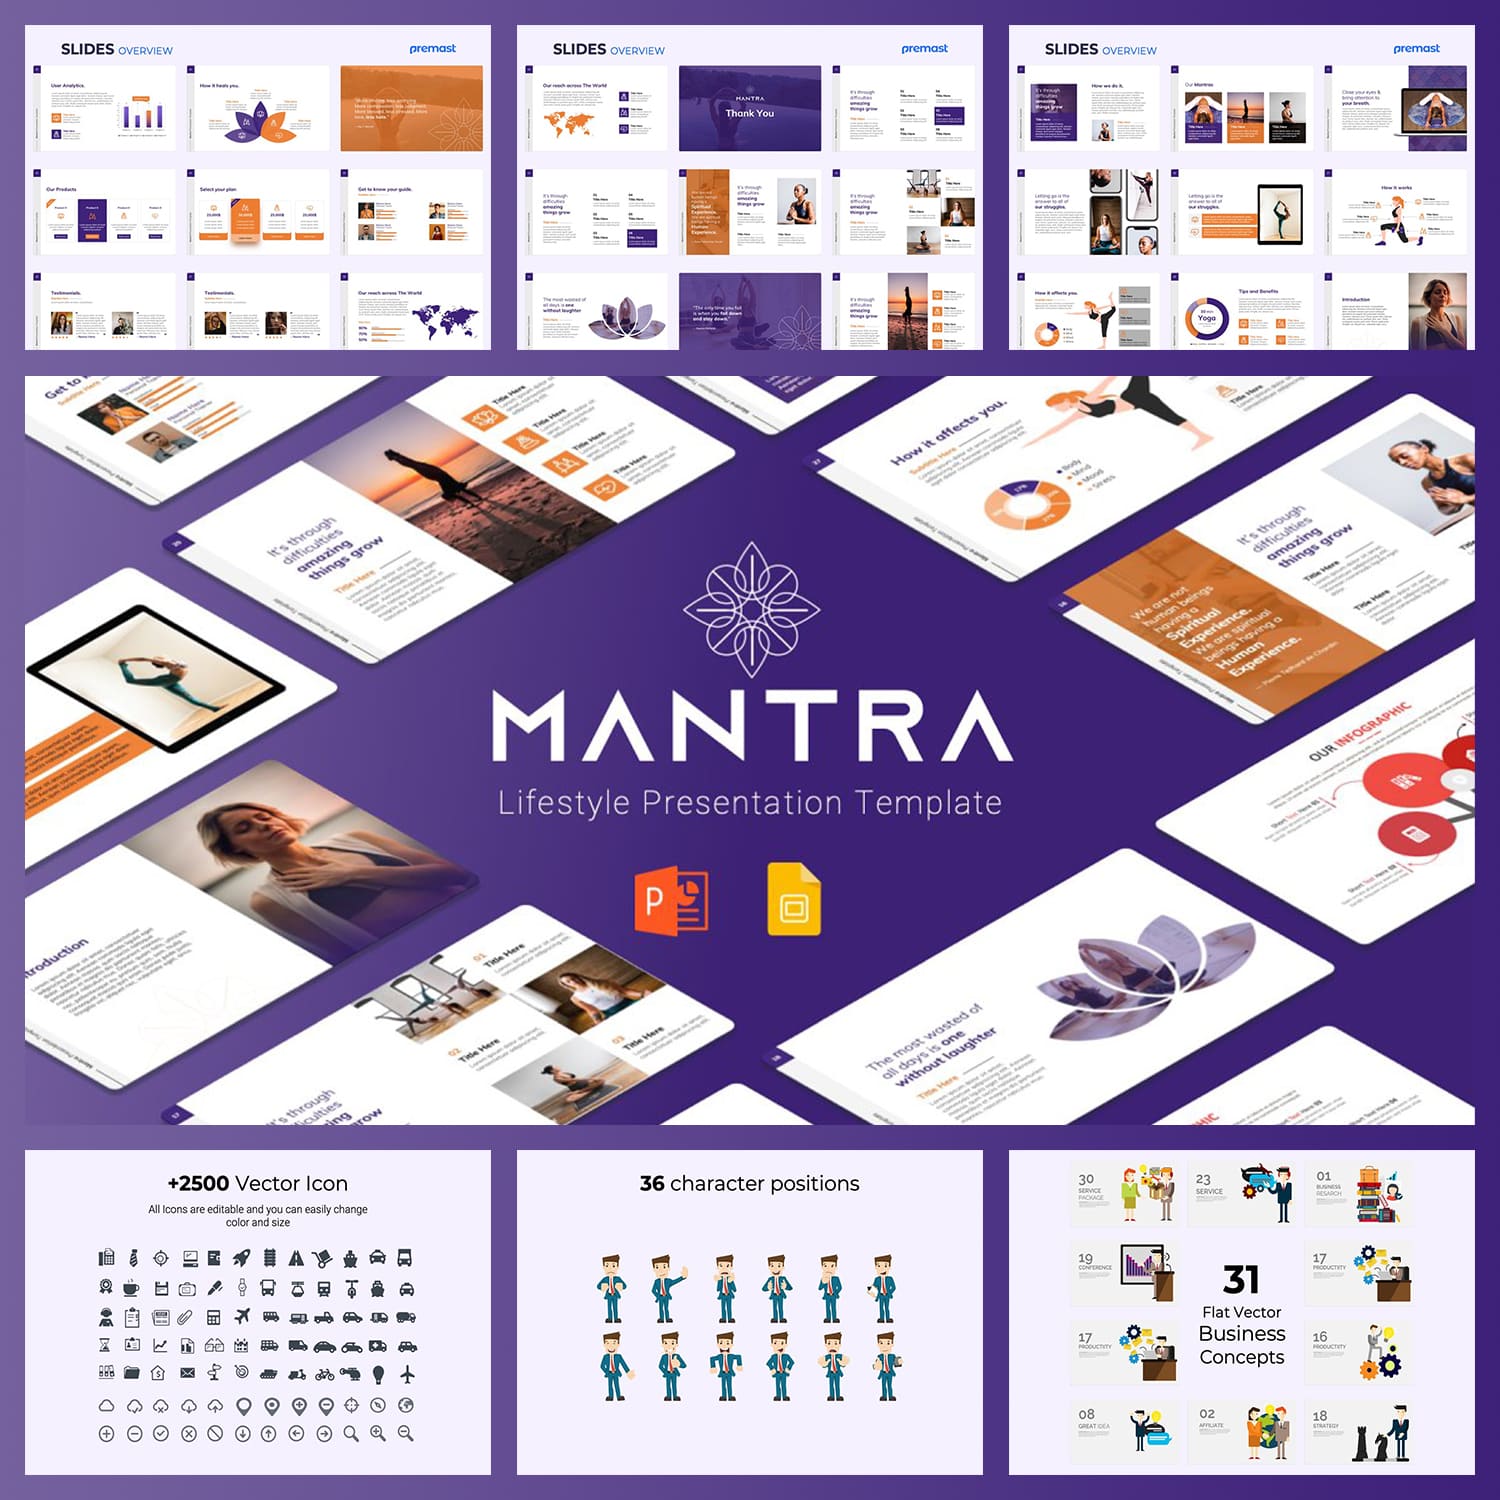 Mantra Lifestyle PPTX Template cover image.